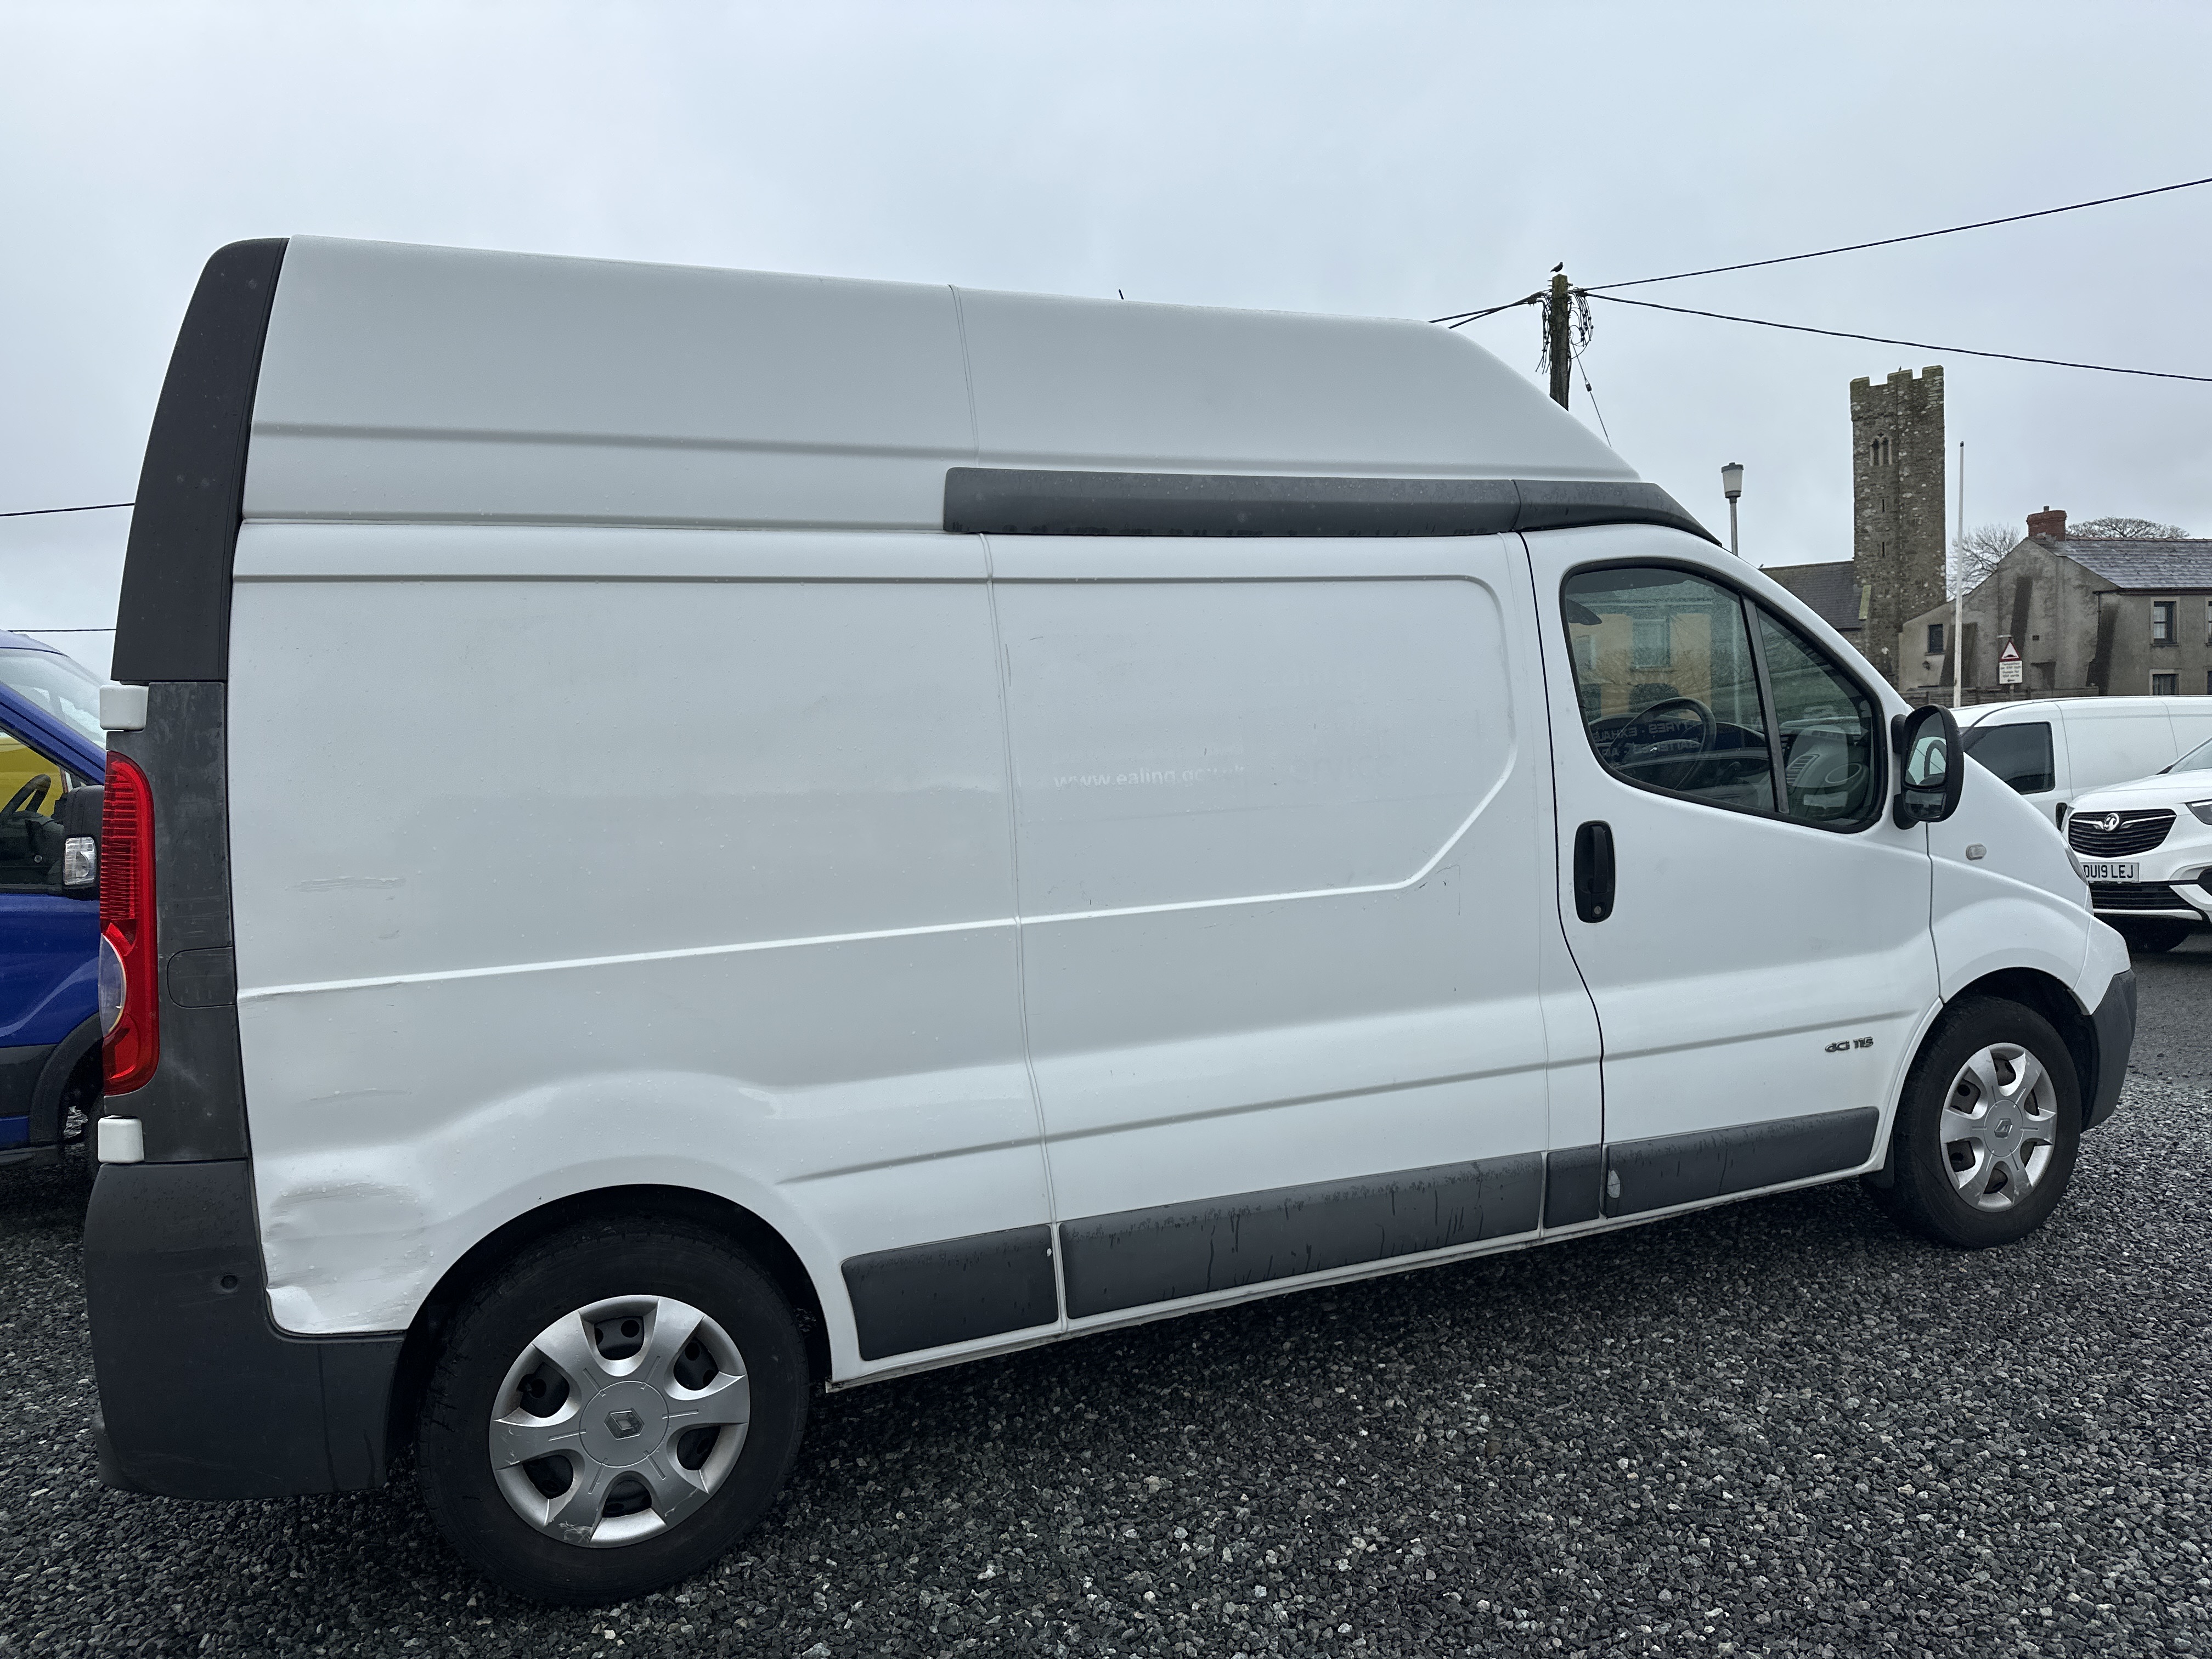 Renault TRAFFIC LH29 DCI HIGHTOP for sale at Mike Howlin Motor Sales Pembrokeshire